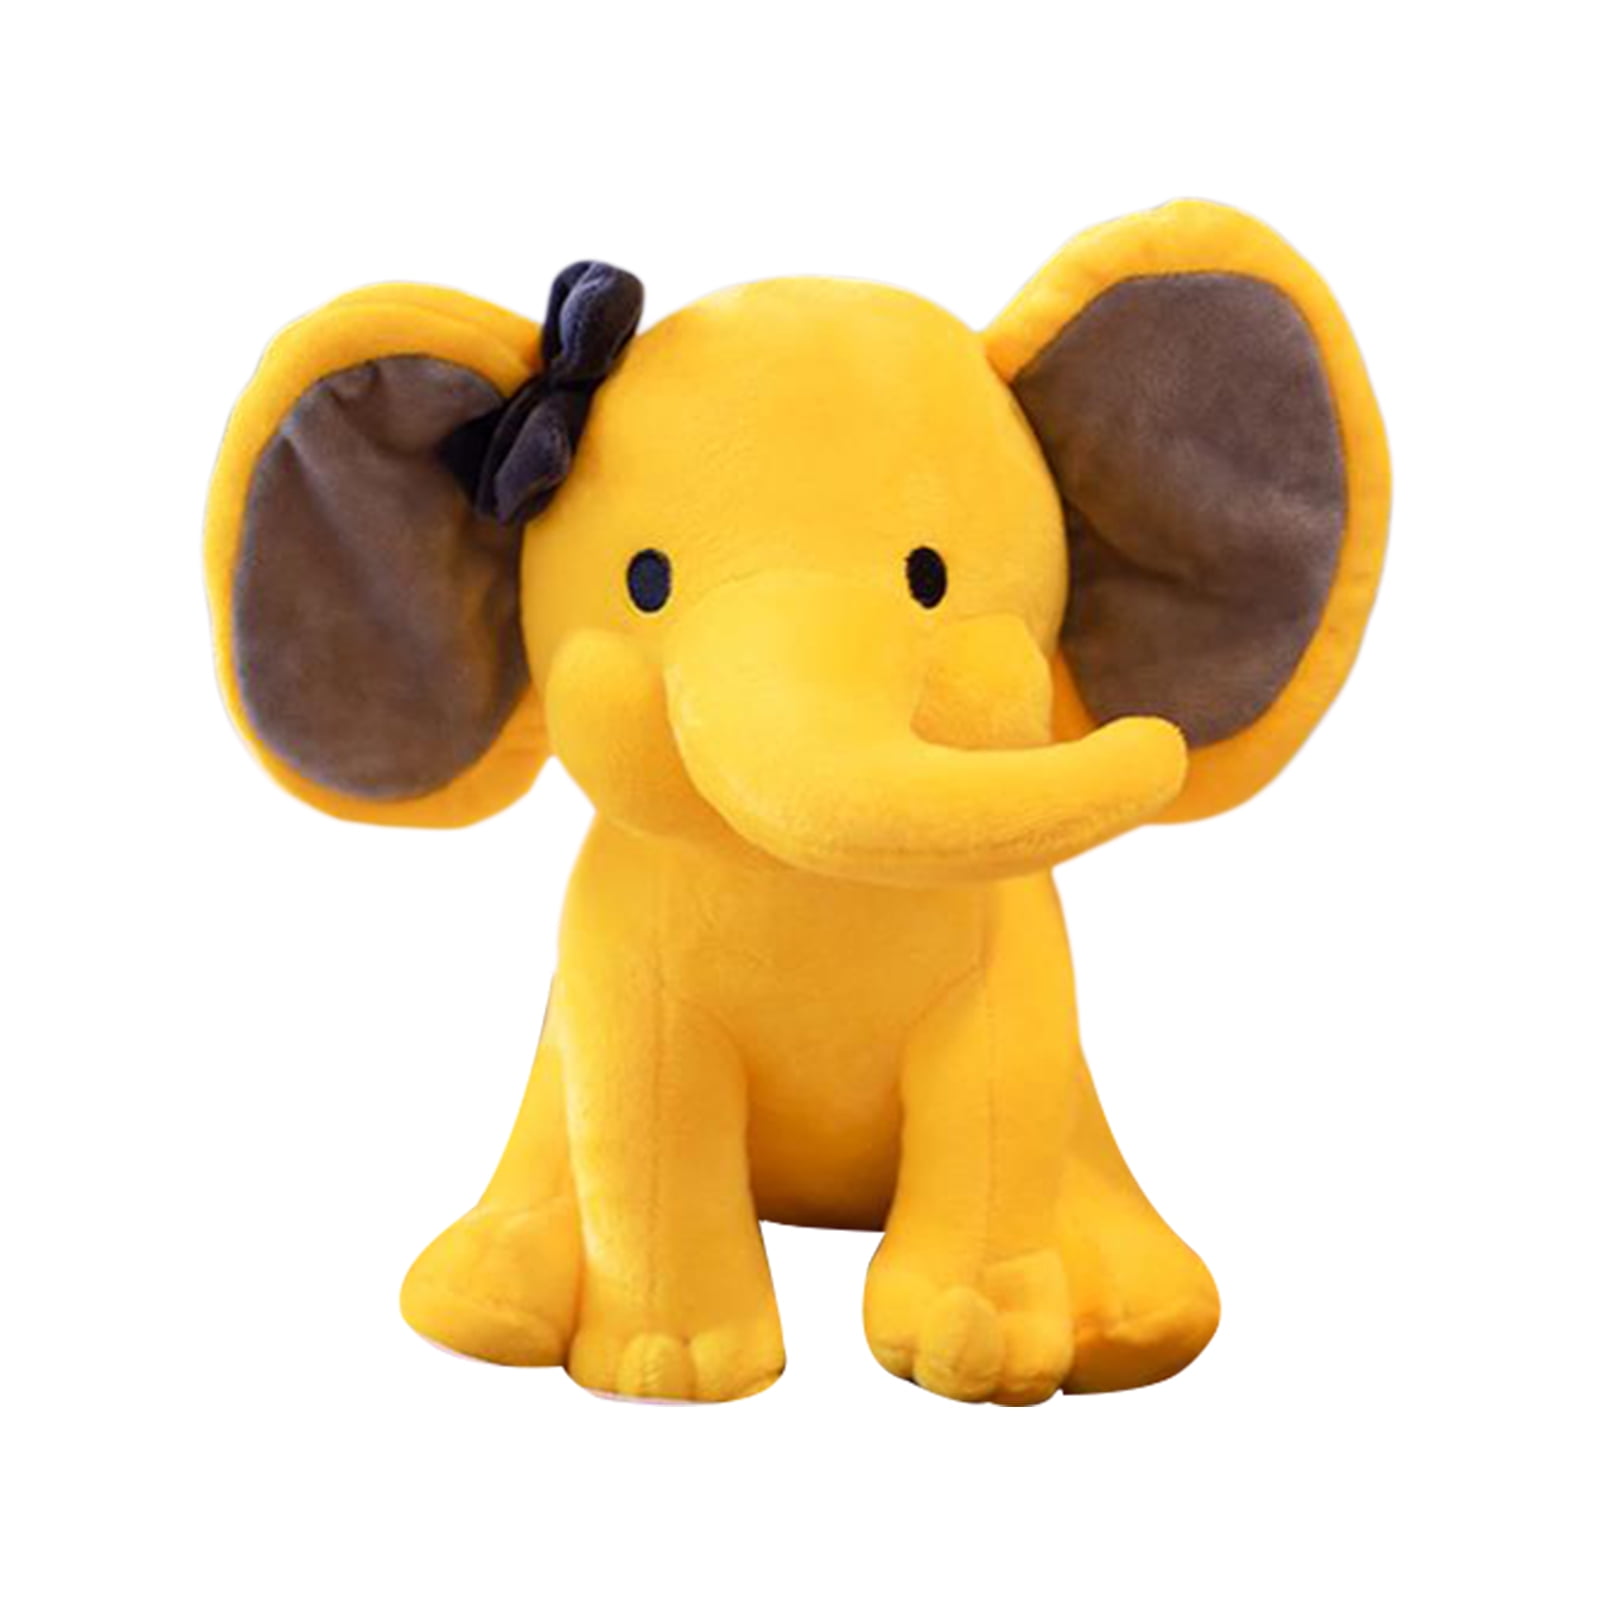 Details about   Kids 9.8 inches Elephant Doll Plush Stuffed Toy for Sleeping Comfortable 